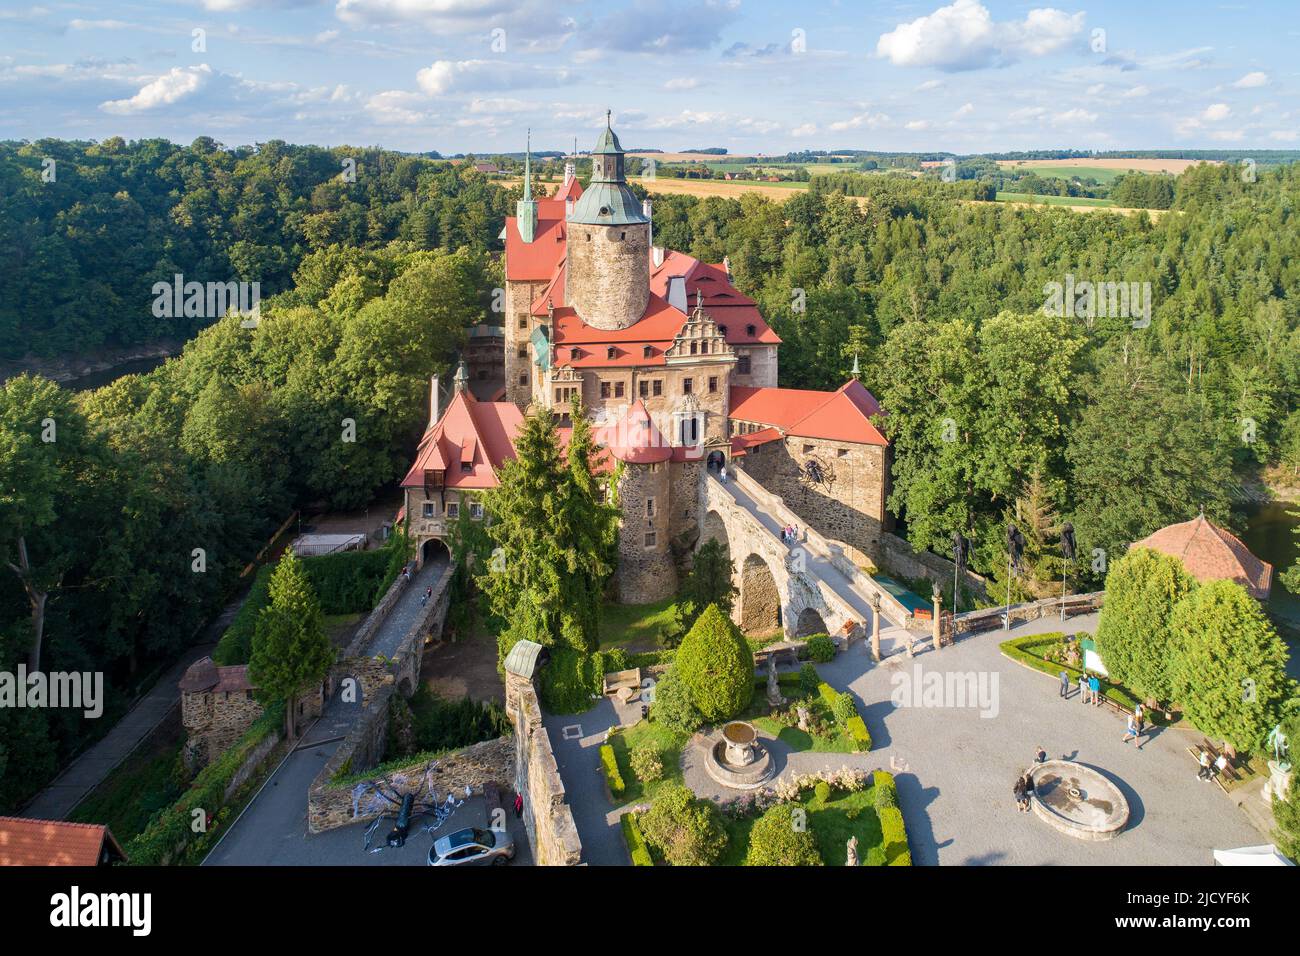 Czocha (Tzschocha) medieval castle in Lower Silesia in Poland. Built in 13th century (the main keep) with many later additions. Aerial view in summer Stock Photo